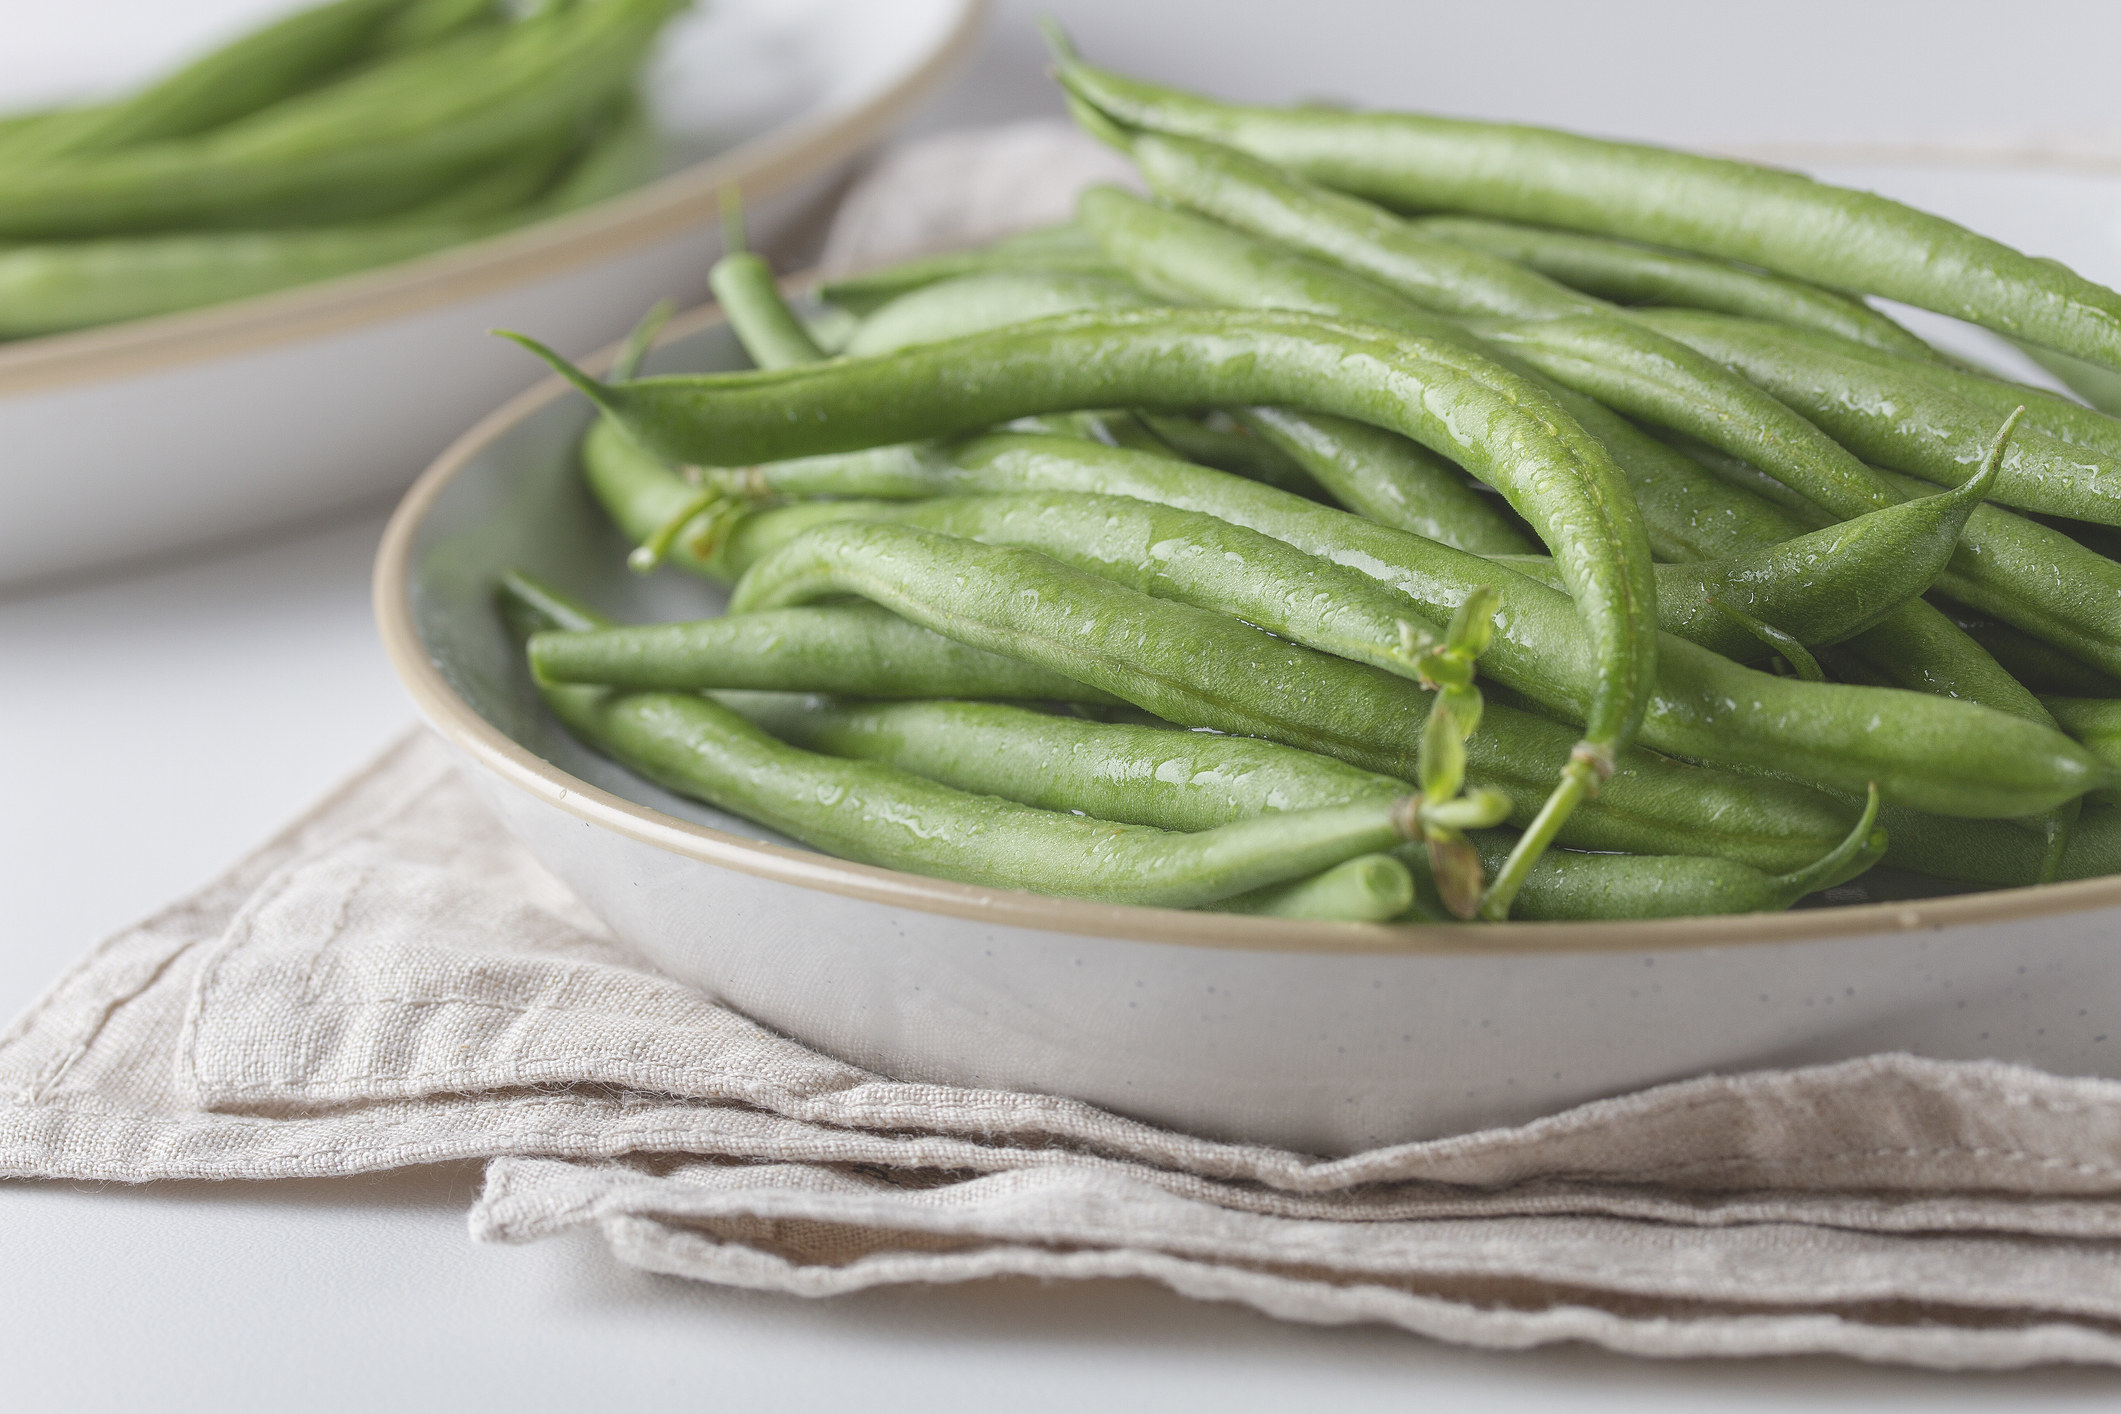 Green beans in bowl